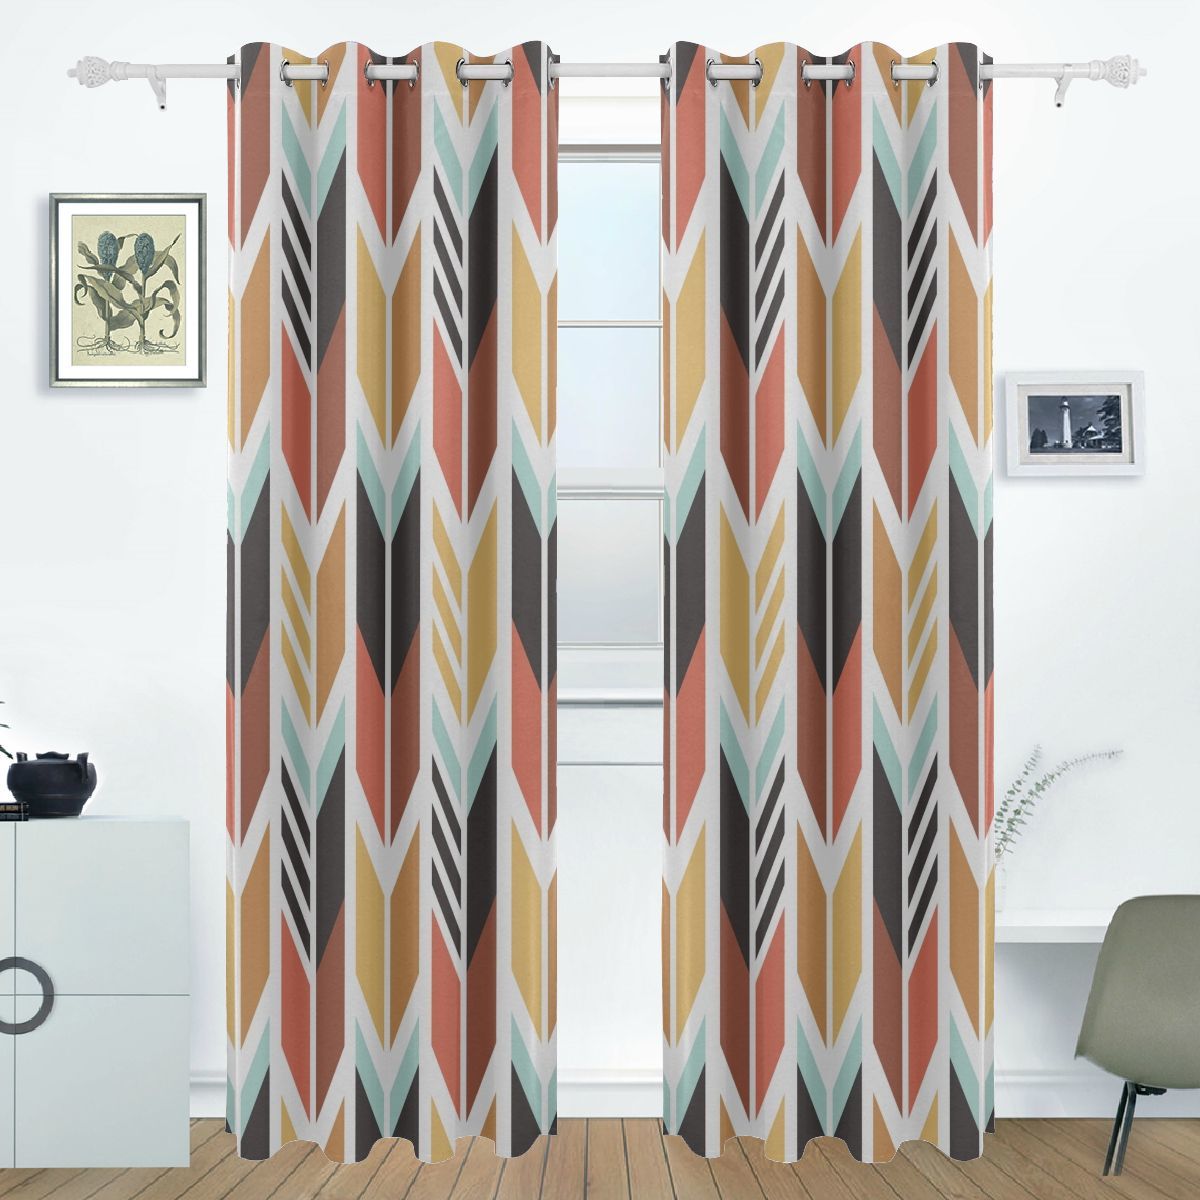 Toddler Bedroom Curtains Ethnic Colorful Arrow Tribal Print Kids ...